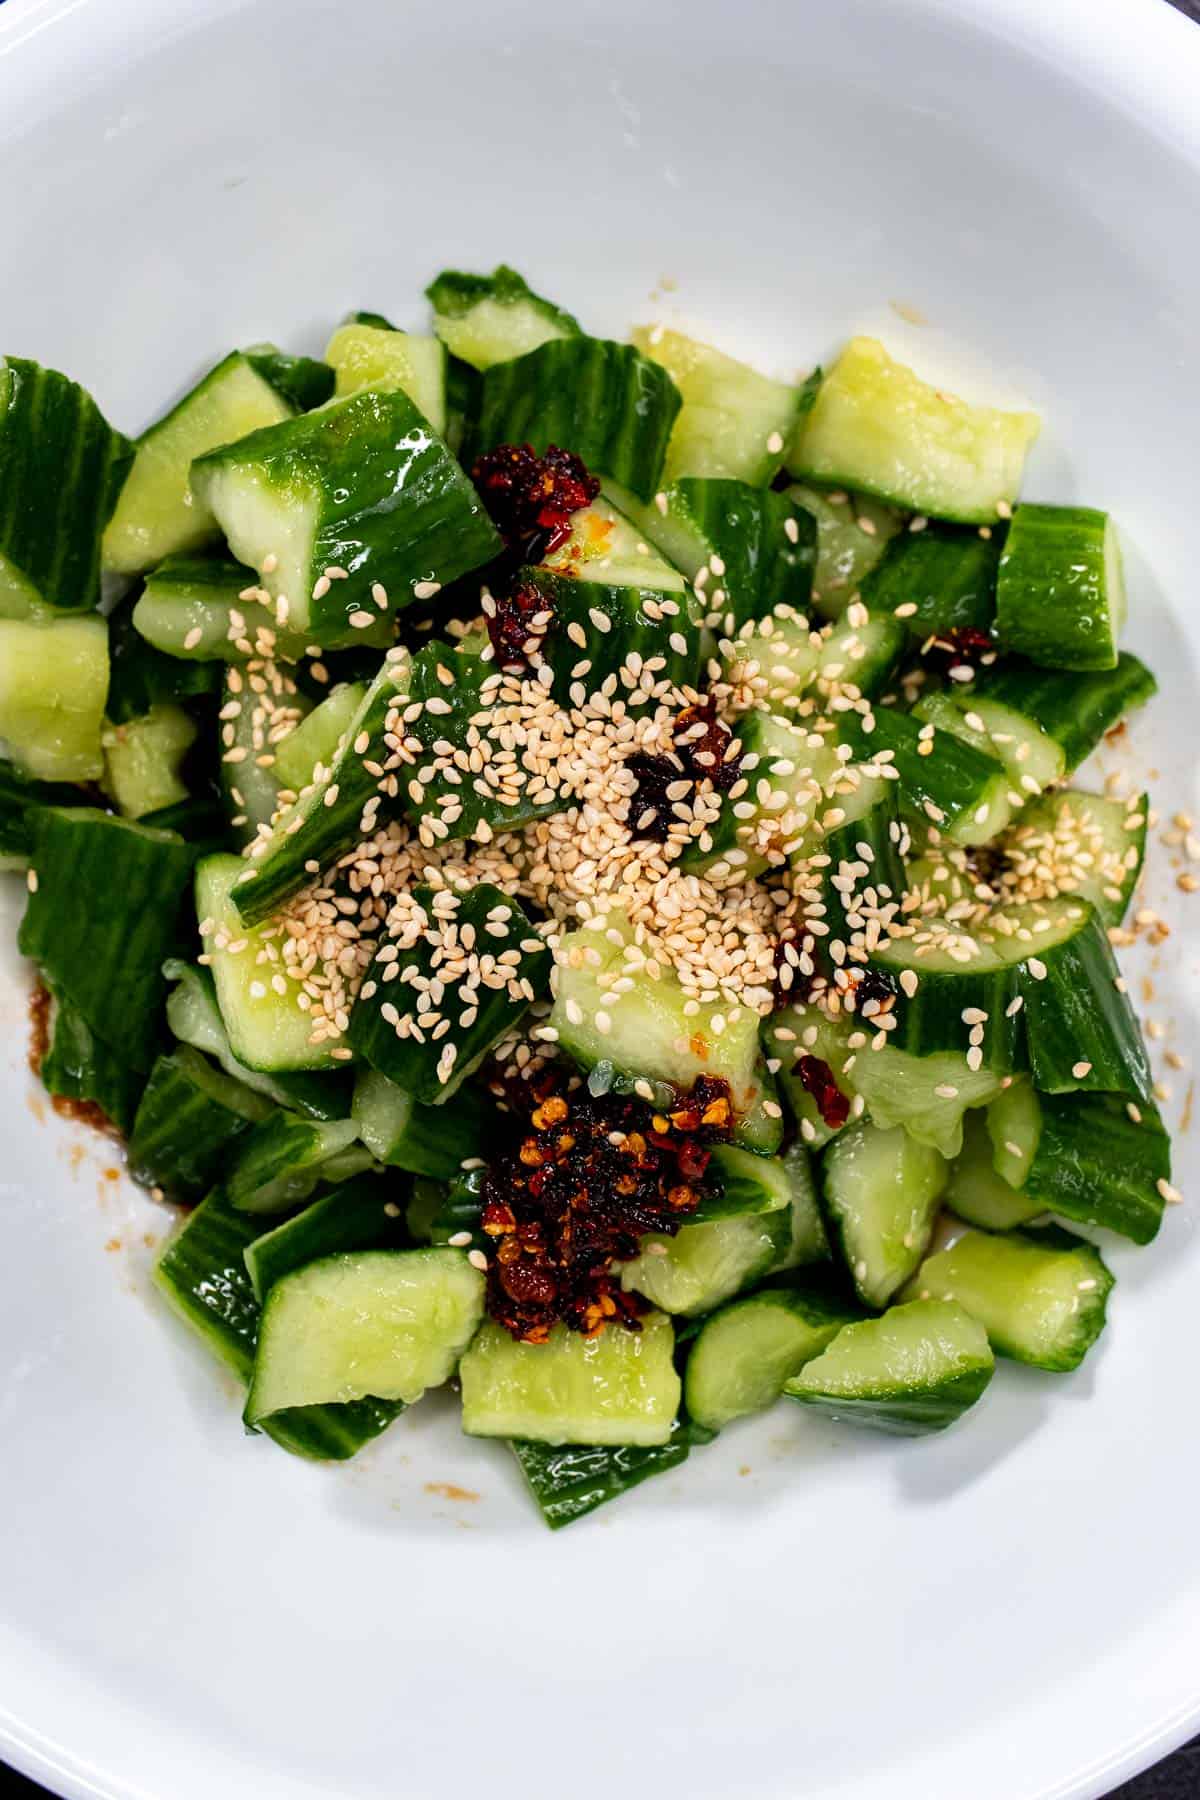 Smashed cucumbers tossed with dressing in a mixing bowl.